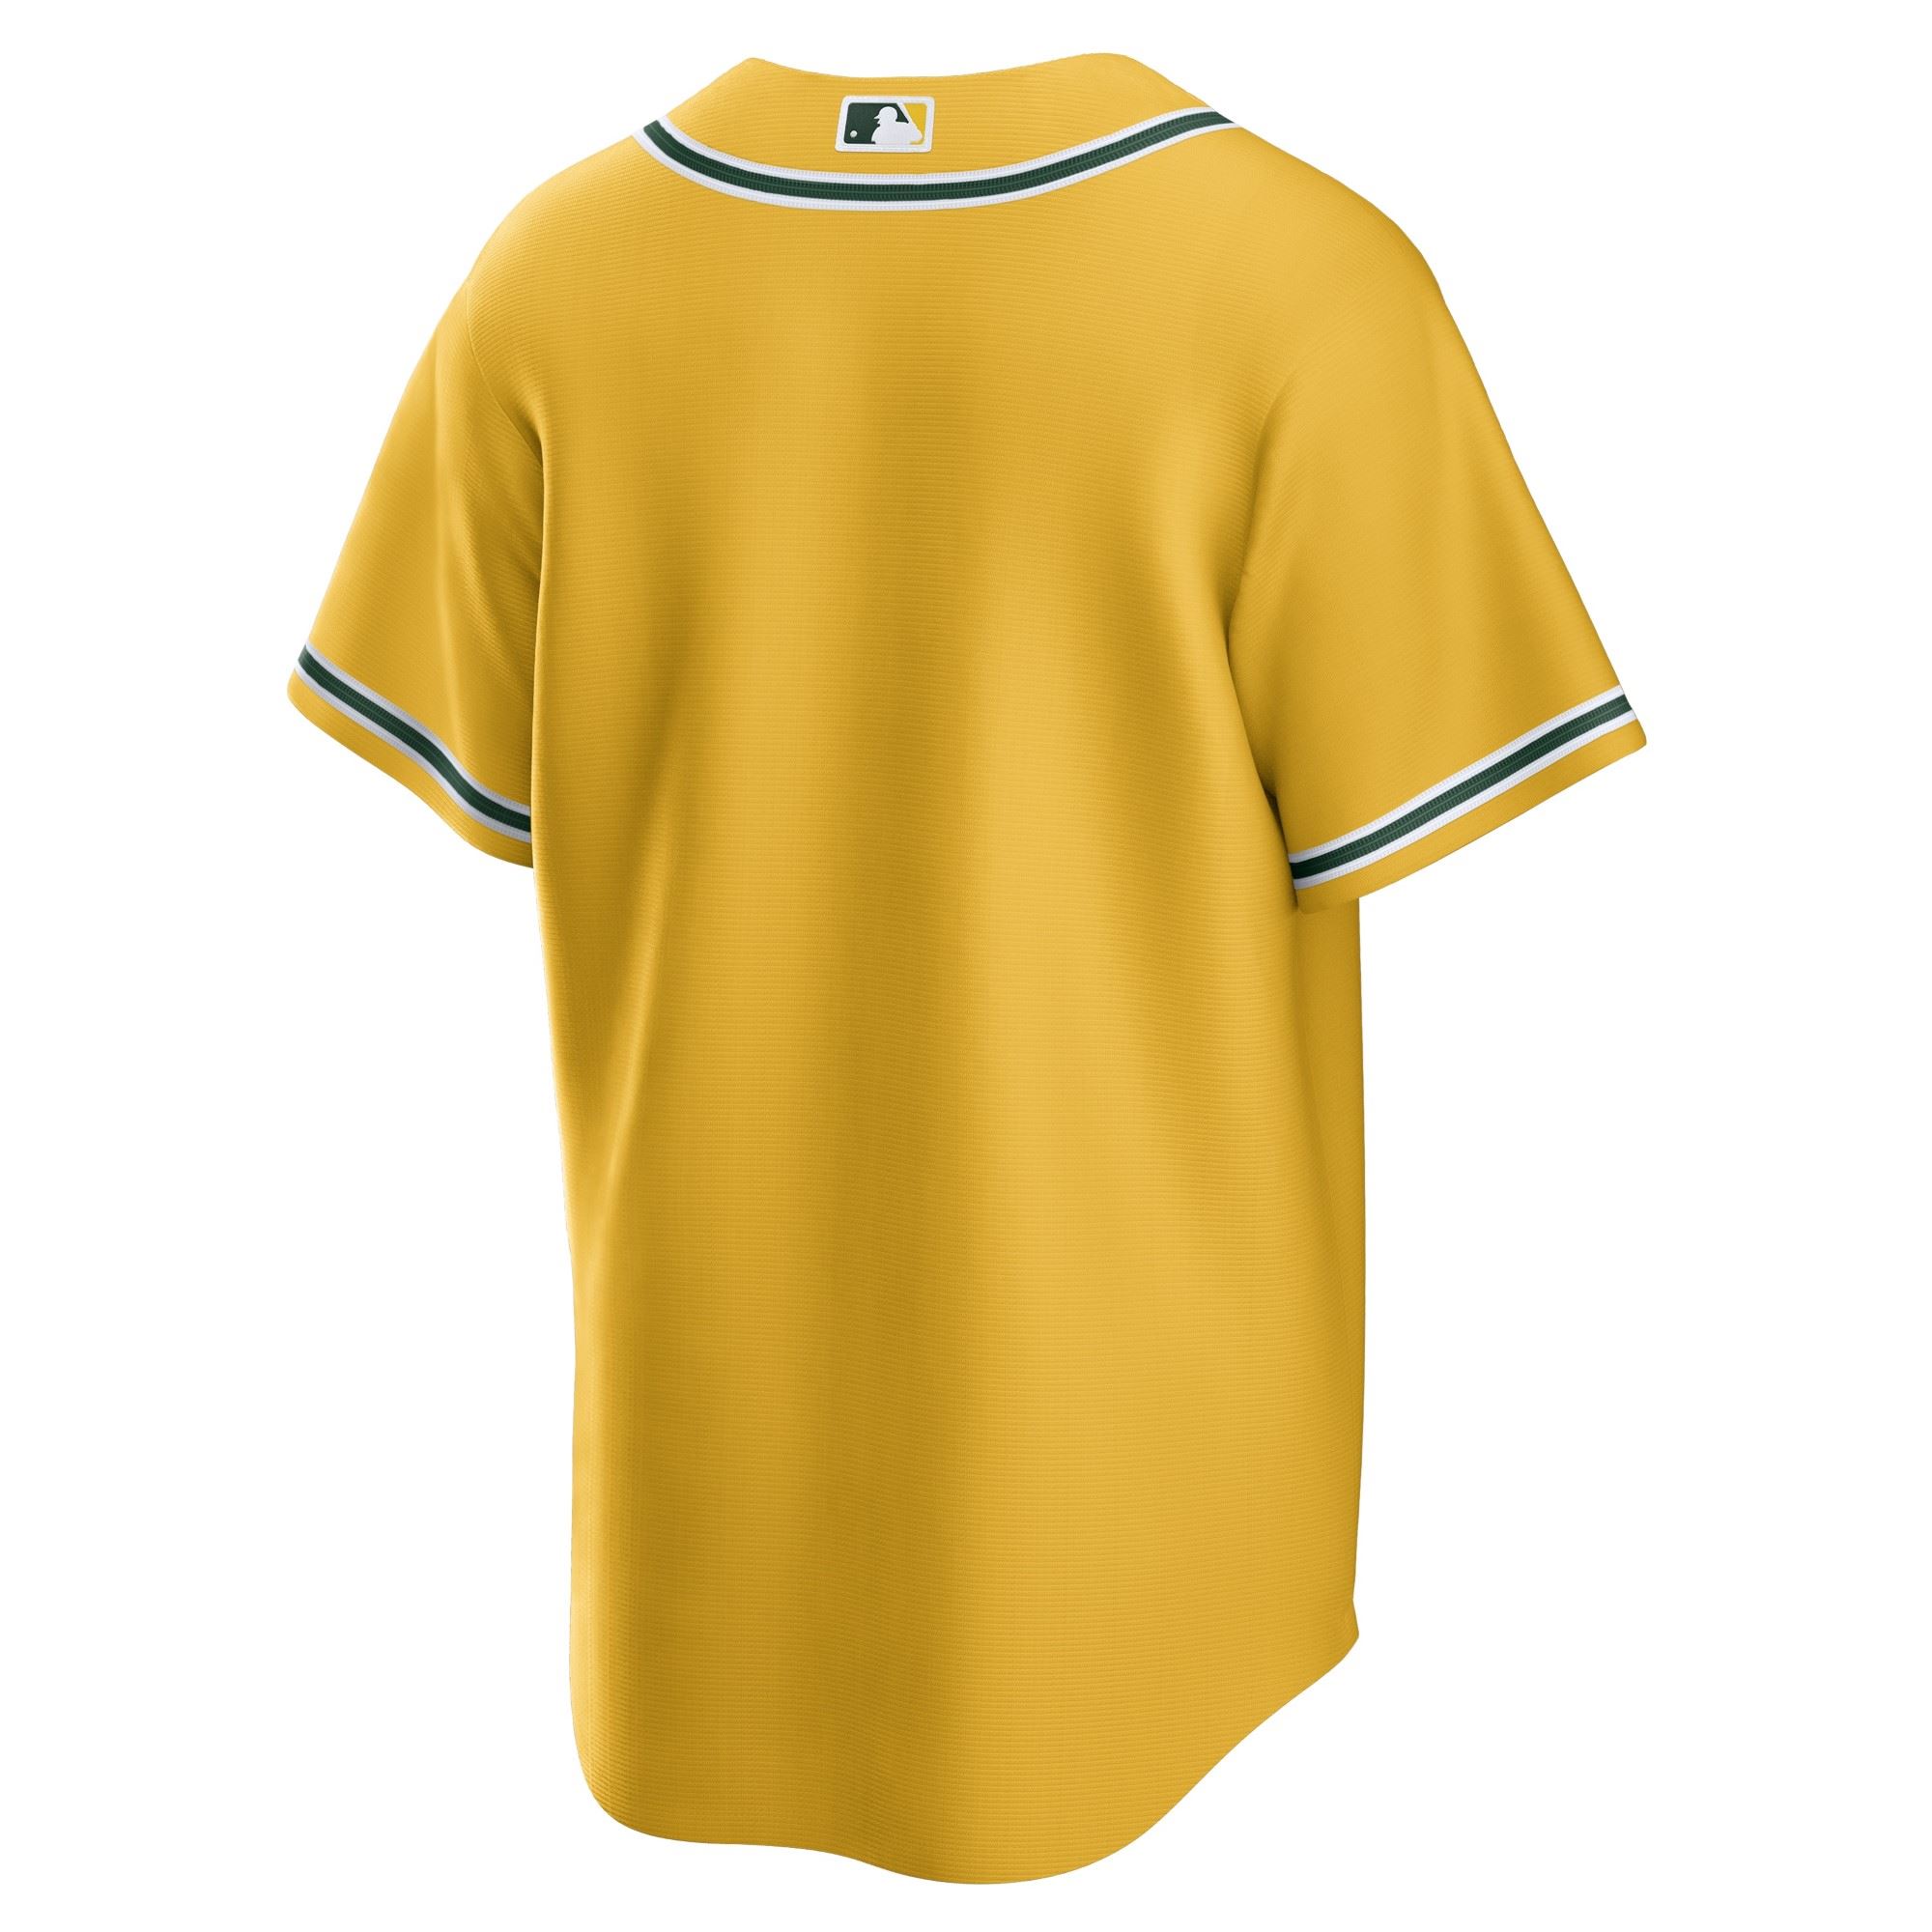 Oakland Athletics Yellow Official MLB Replica Alternate Jersey Nike